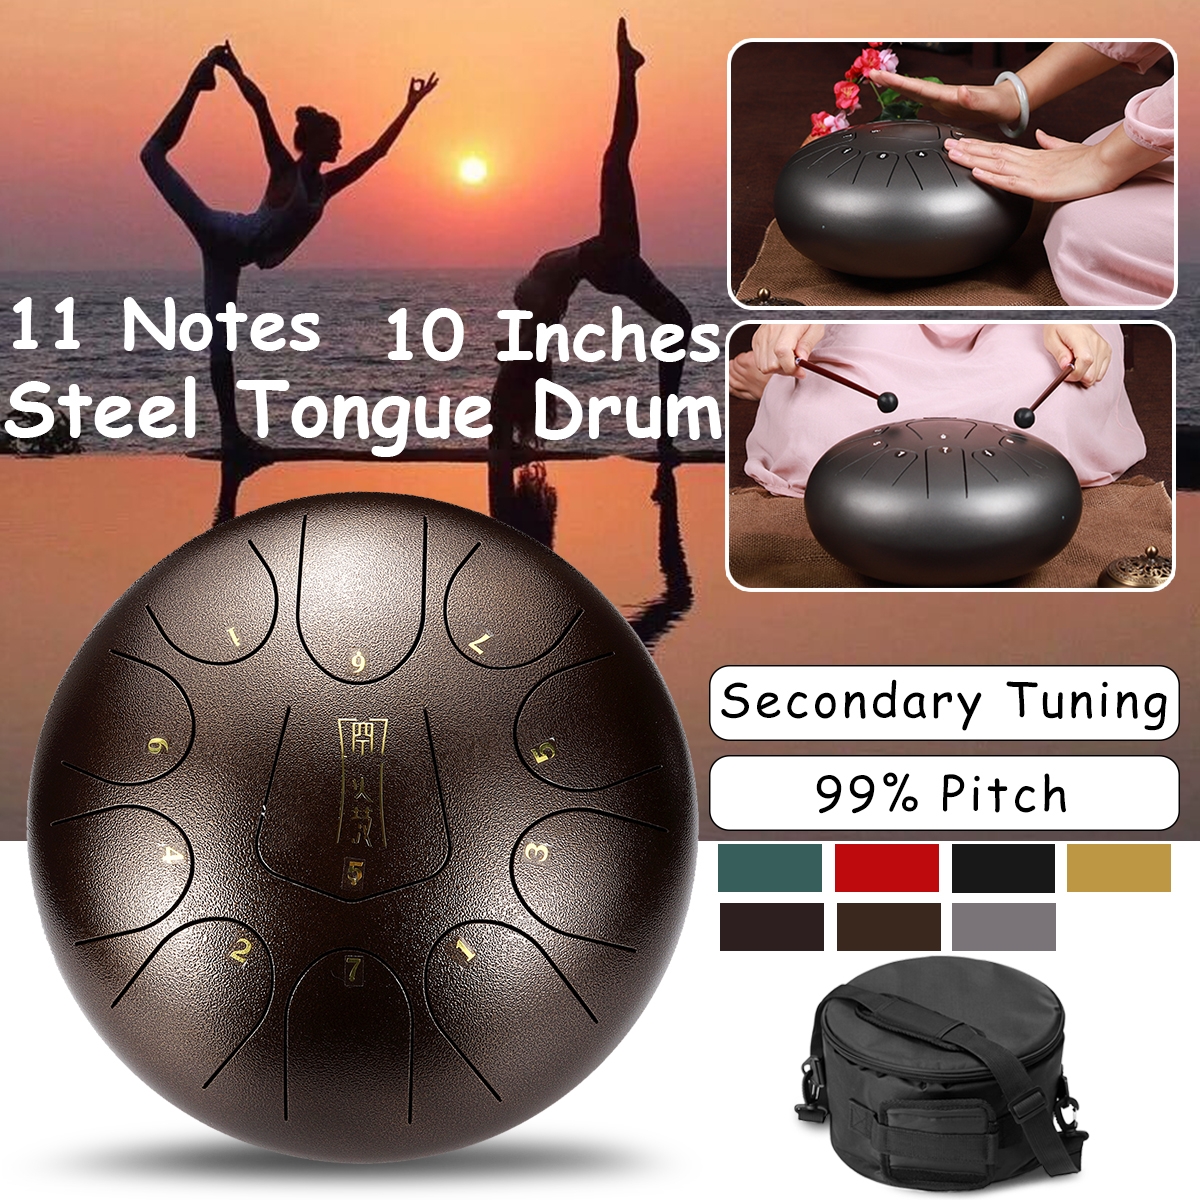 10 Inches 11 Notes Steel Tongue Drum Steel Tongue Percussion with Storage Bag/Drumstick